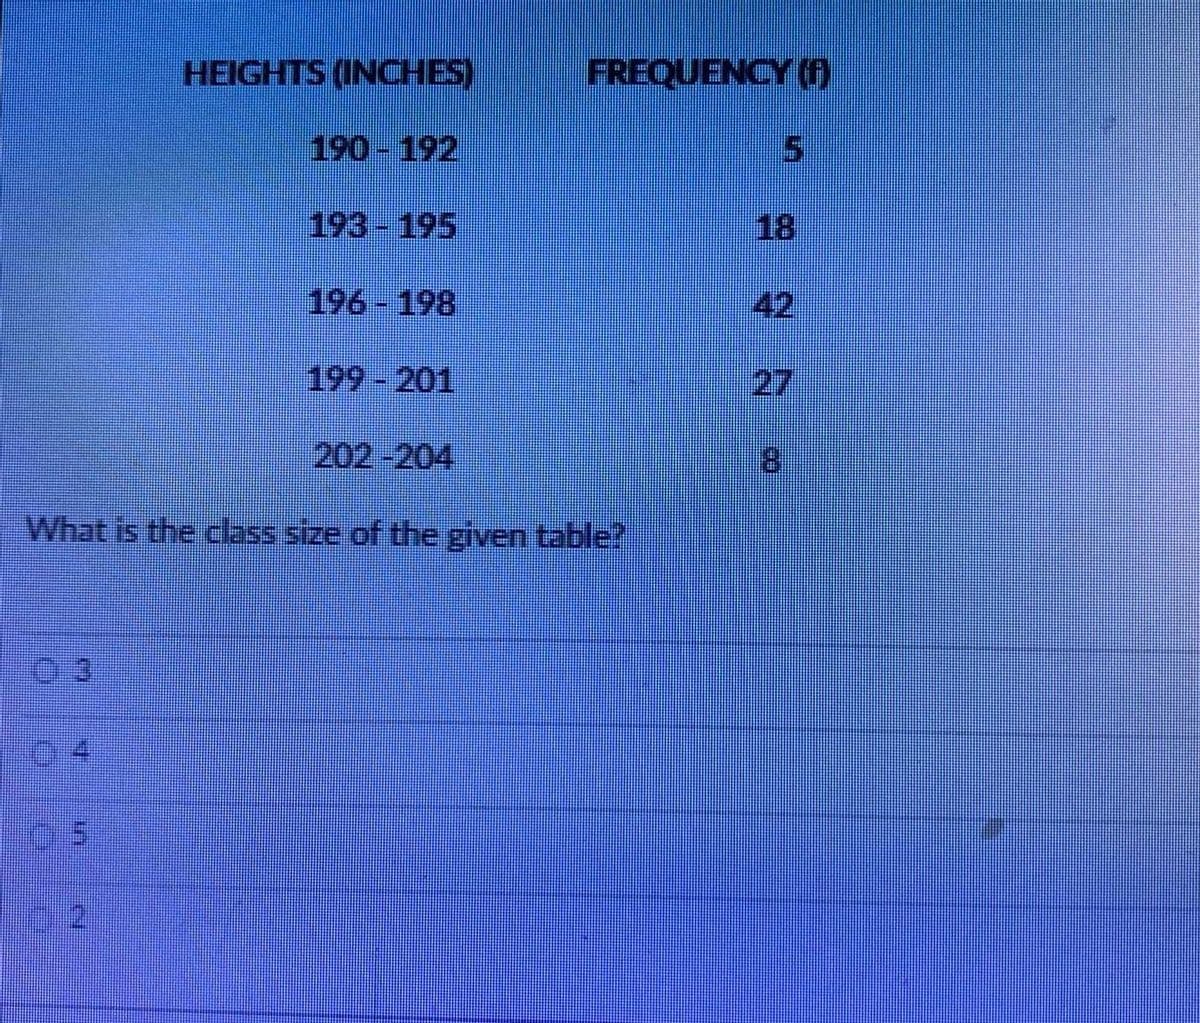 HEIGHTS (INCHES)
FREQUENCY (f
190-192
193- 195
18
196-198
42
199-201
27
202-204
8.
What is the dass size of the given table?
